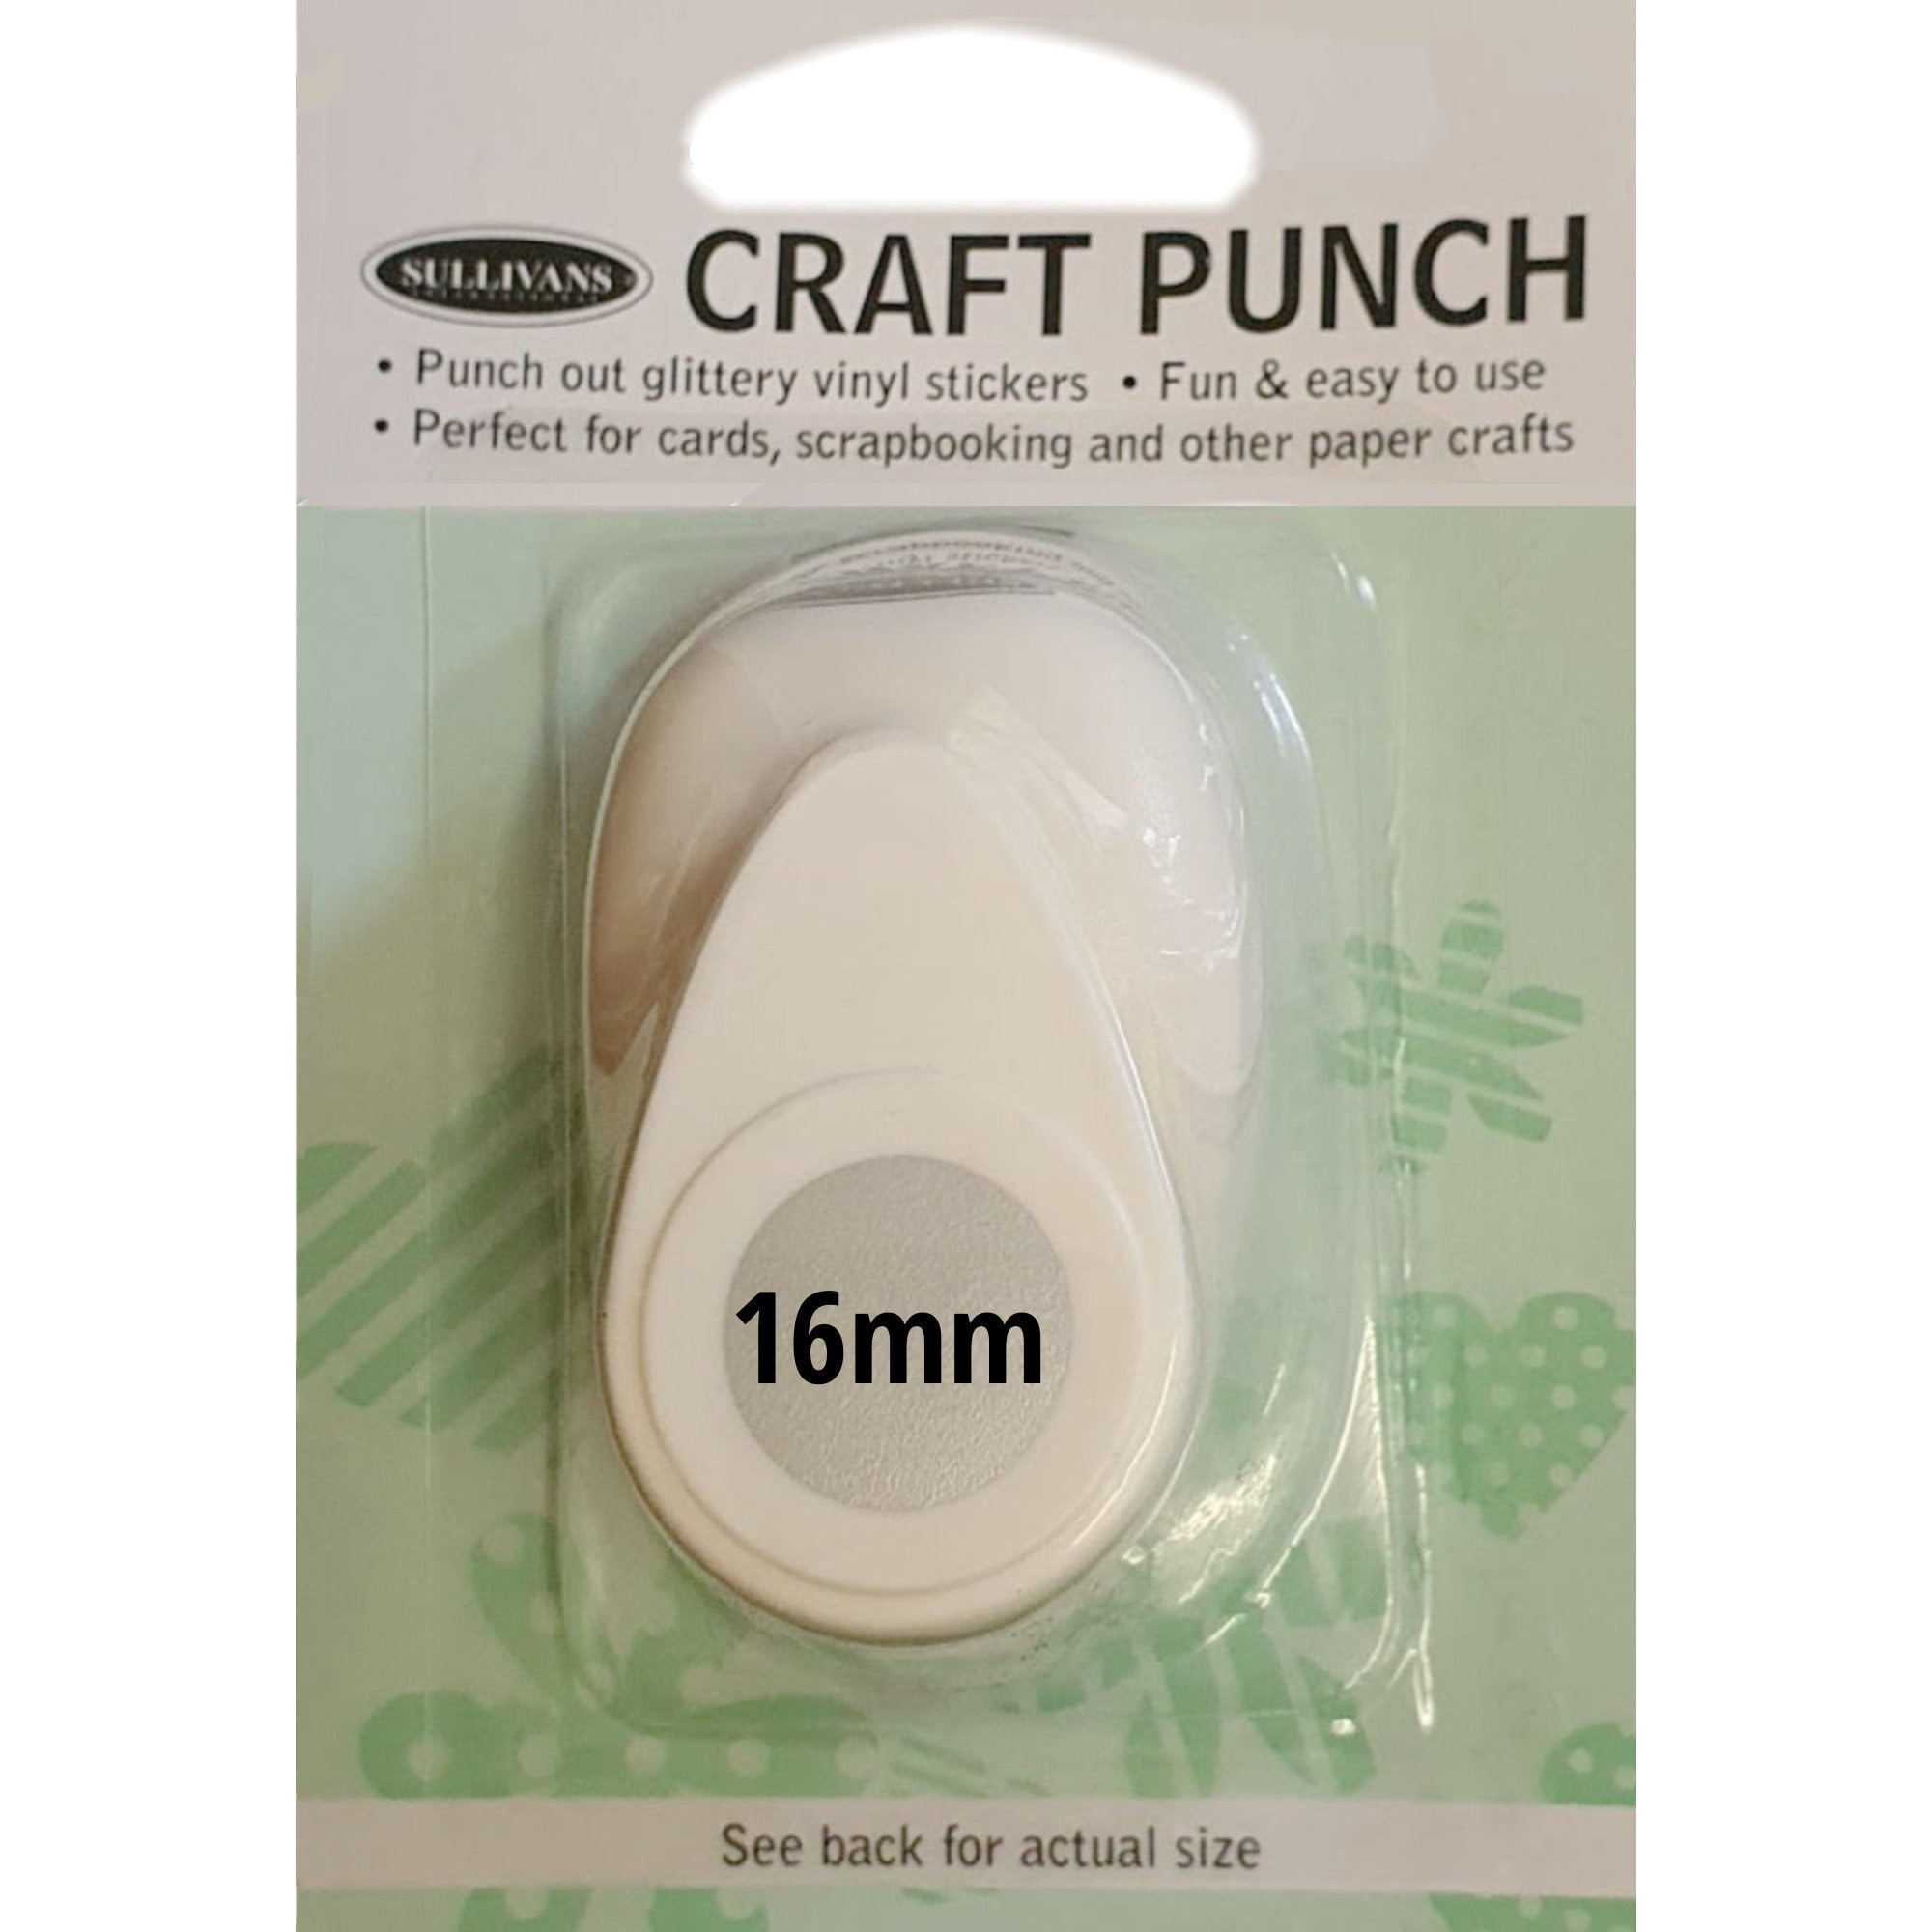 Bira Craft 3/4 Inch Circle Shape,0.75 Inch Circle Punch, Lever Action Craft  Punch, for Paper Crafting Scrapbooking 